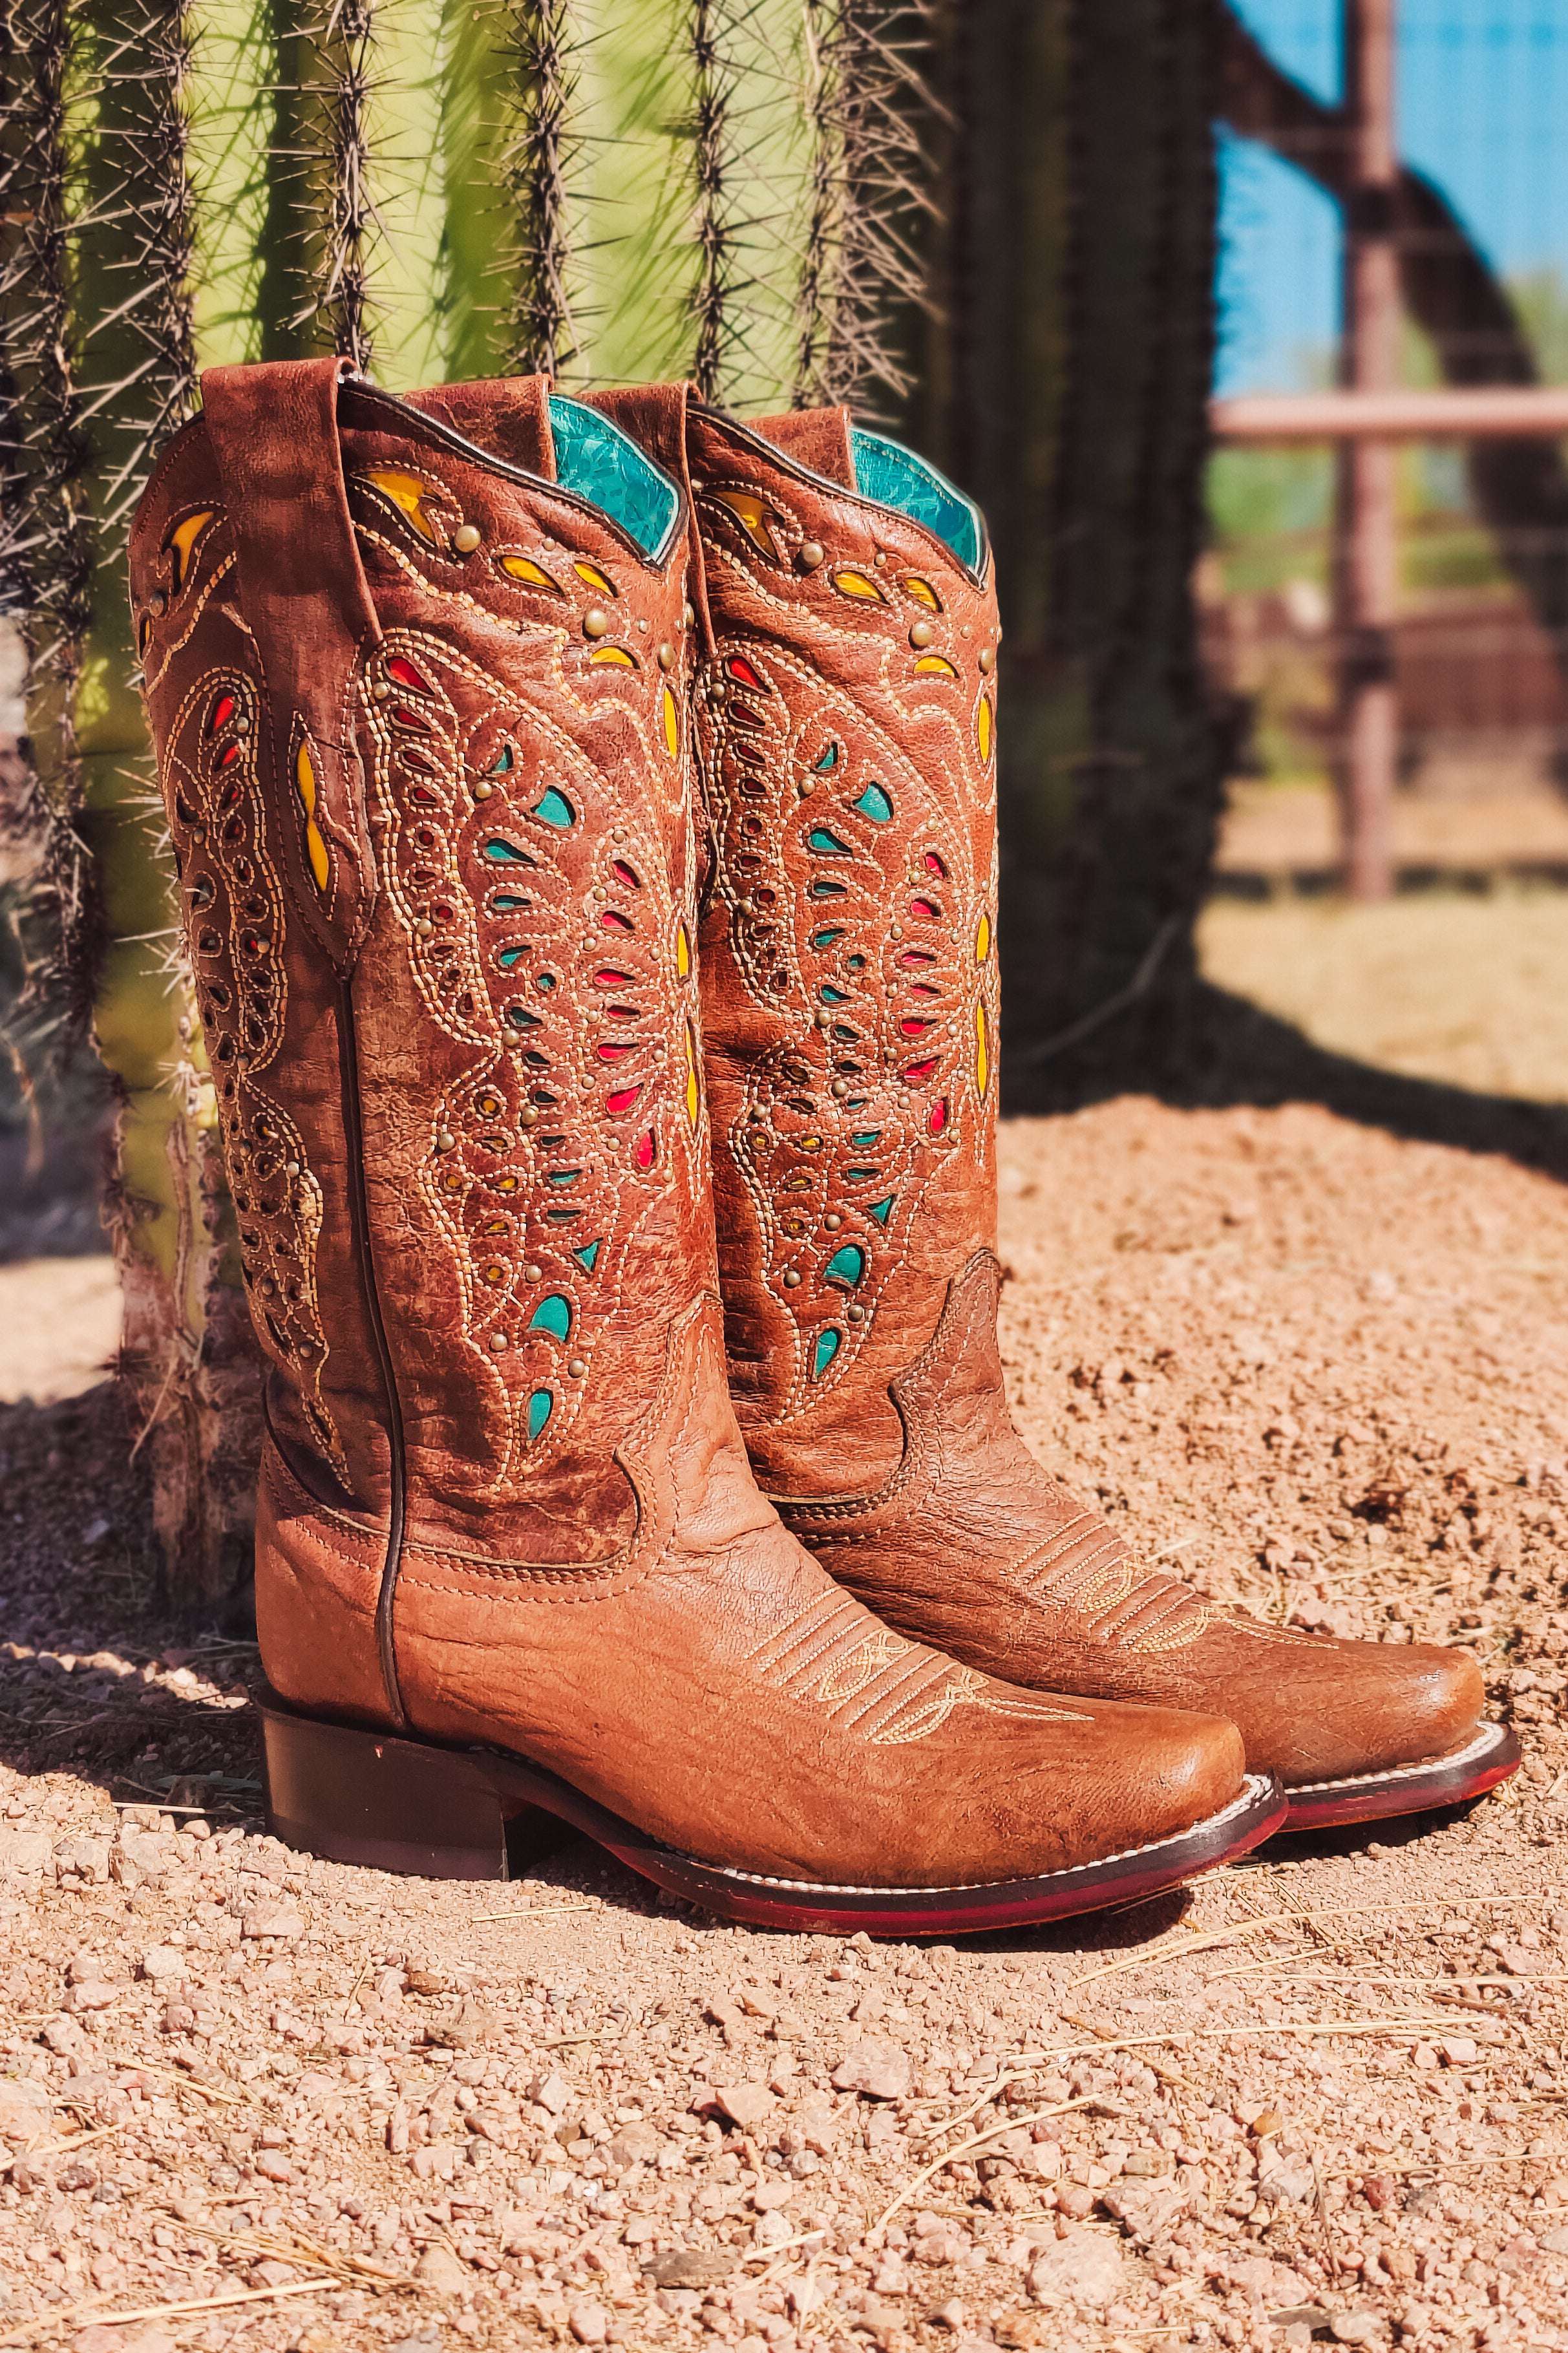 Mariposa Boots by Corral from The Glamorous Cowgirl – TGC Brands